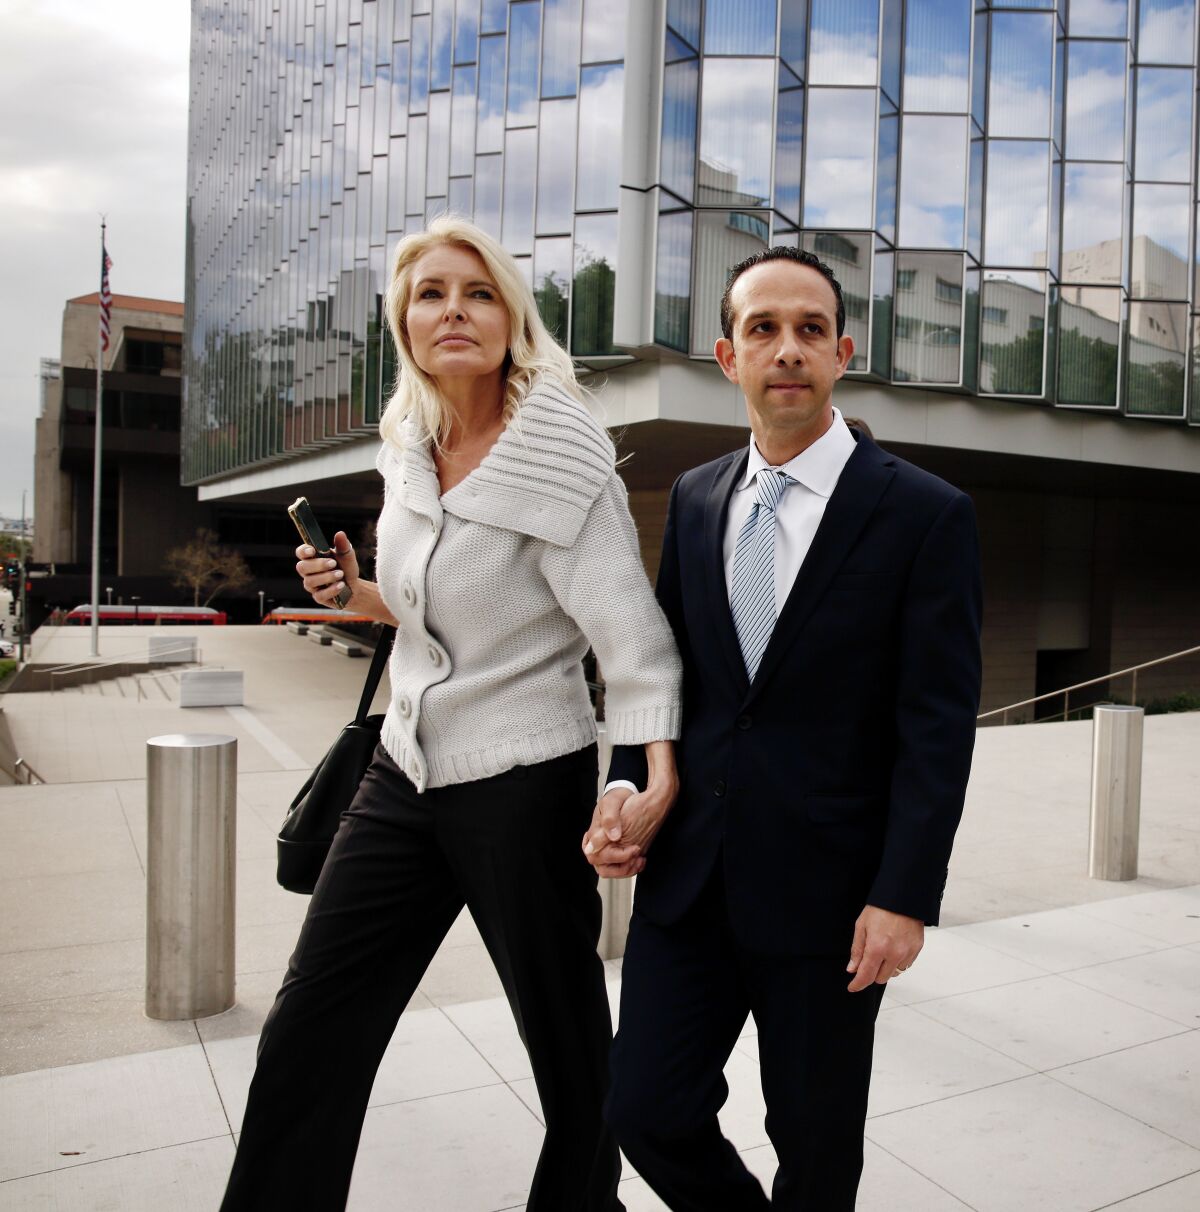 Former Los Angeles City Councilman Mitchell Englander leaves federal court in downtown Los Angeles with his wife, Jayne, in mid-March.